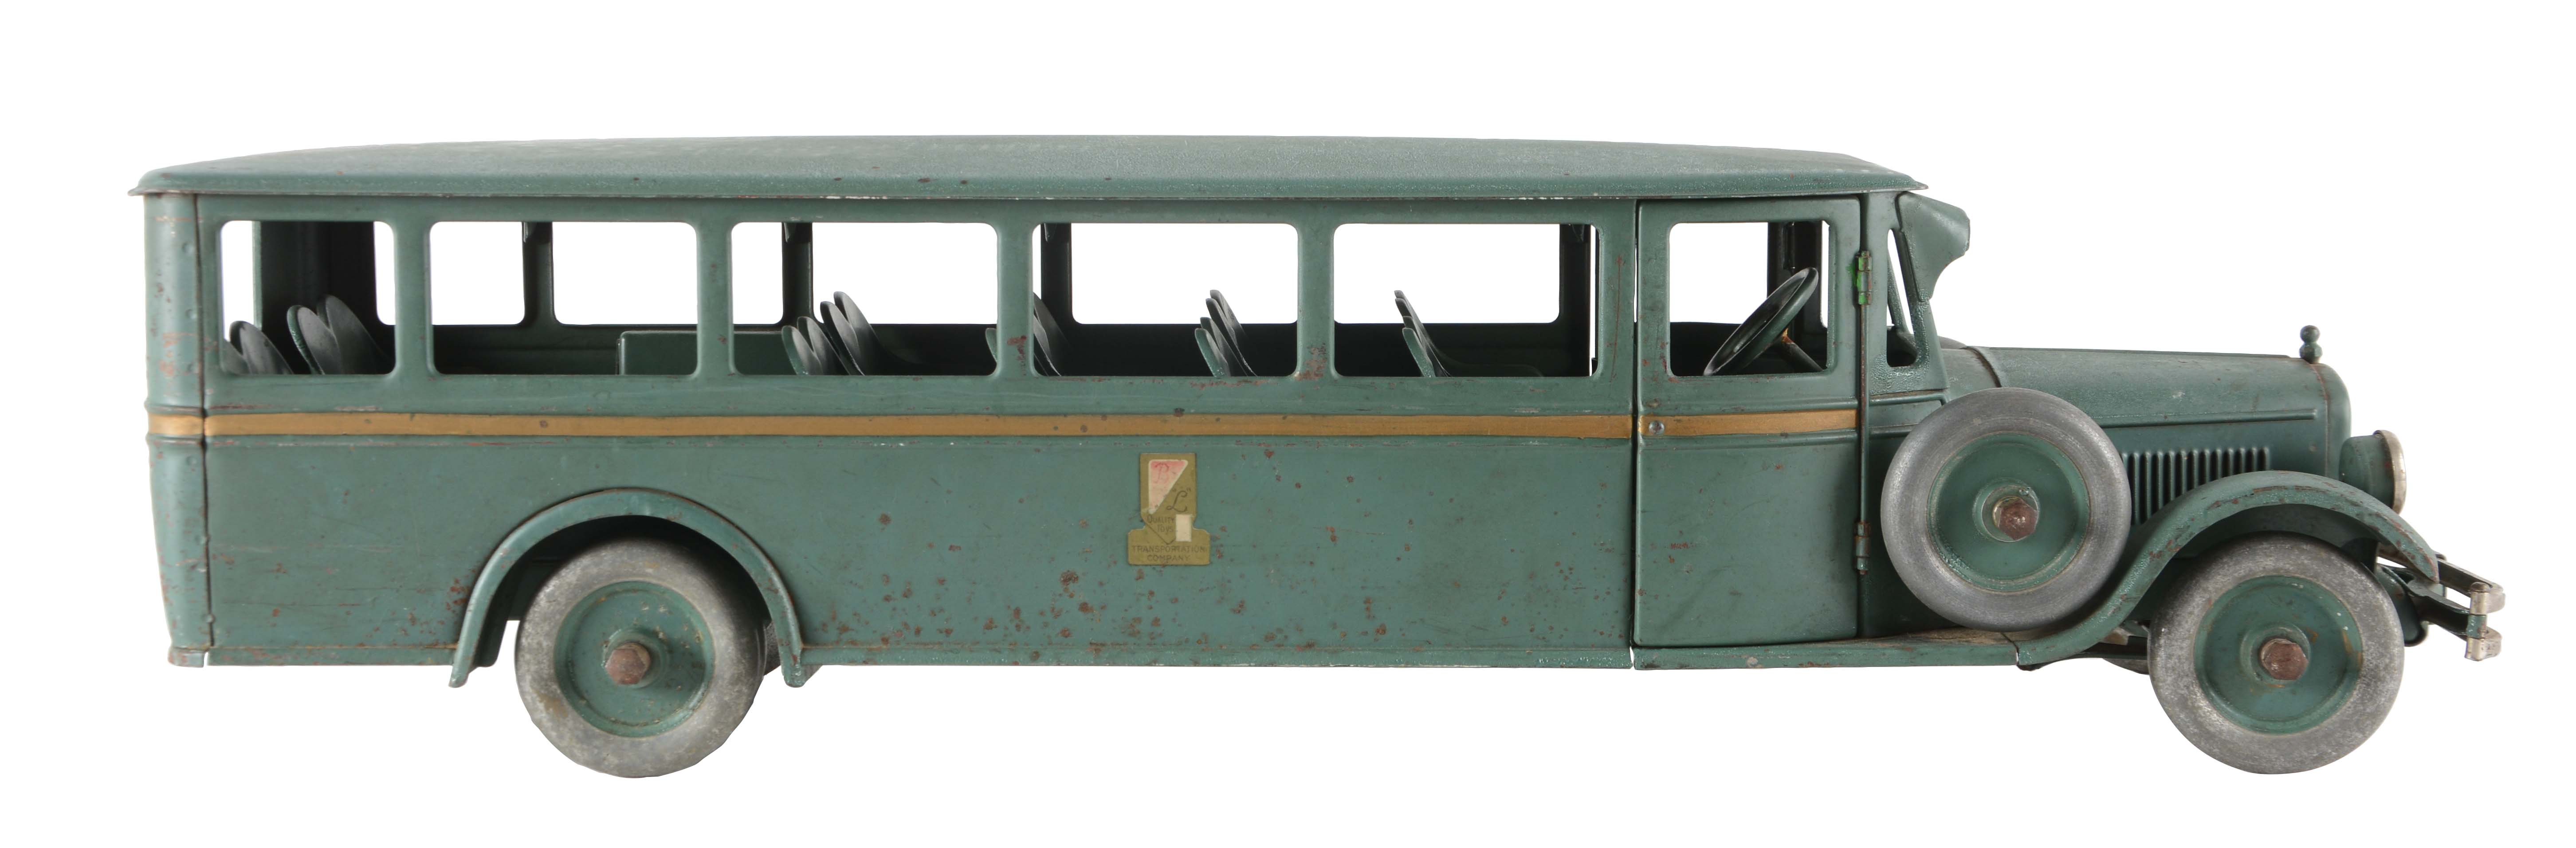 Lot Detail - PRESSED STEEL BUDDY L TOURING BUS.